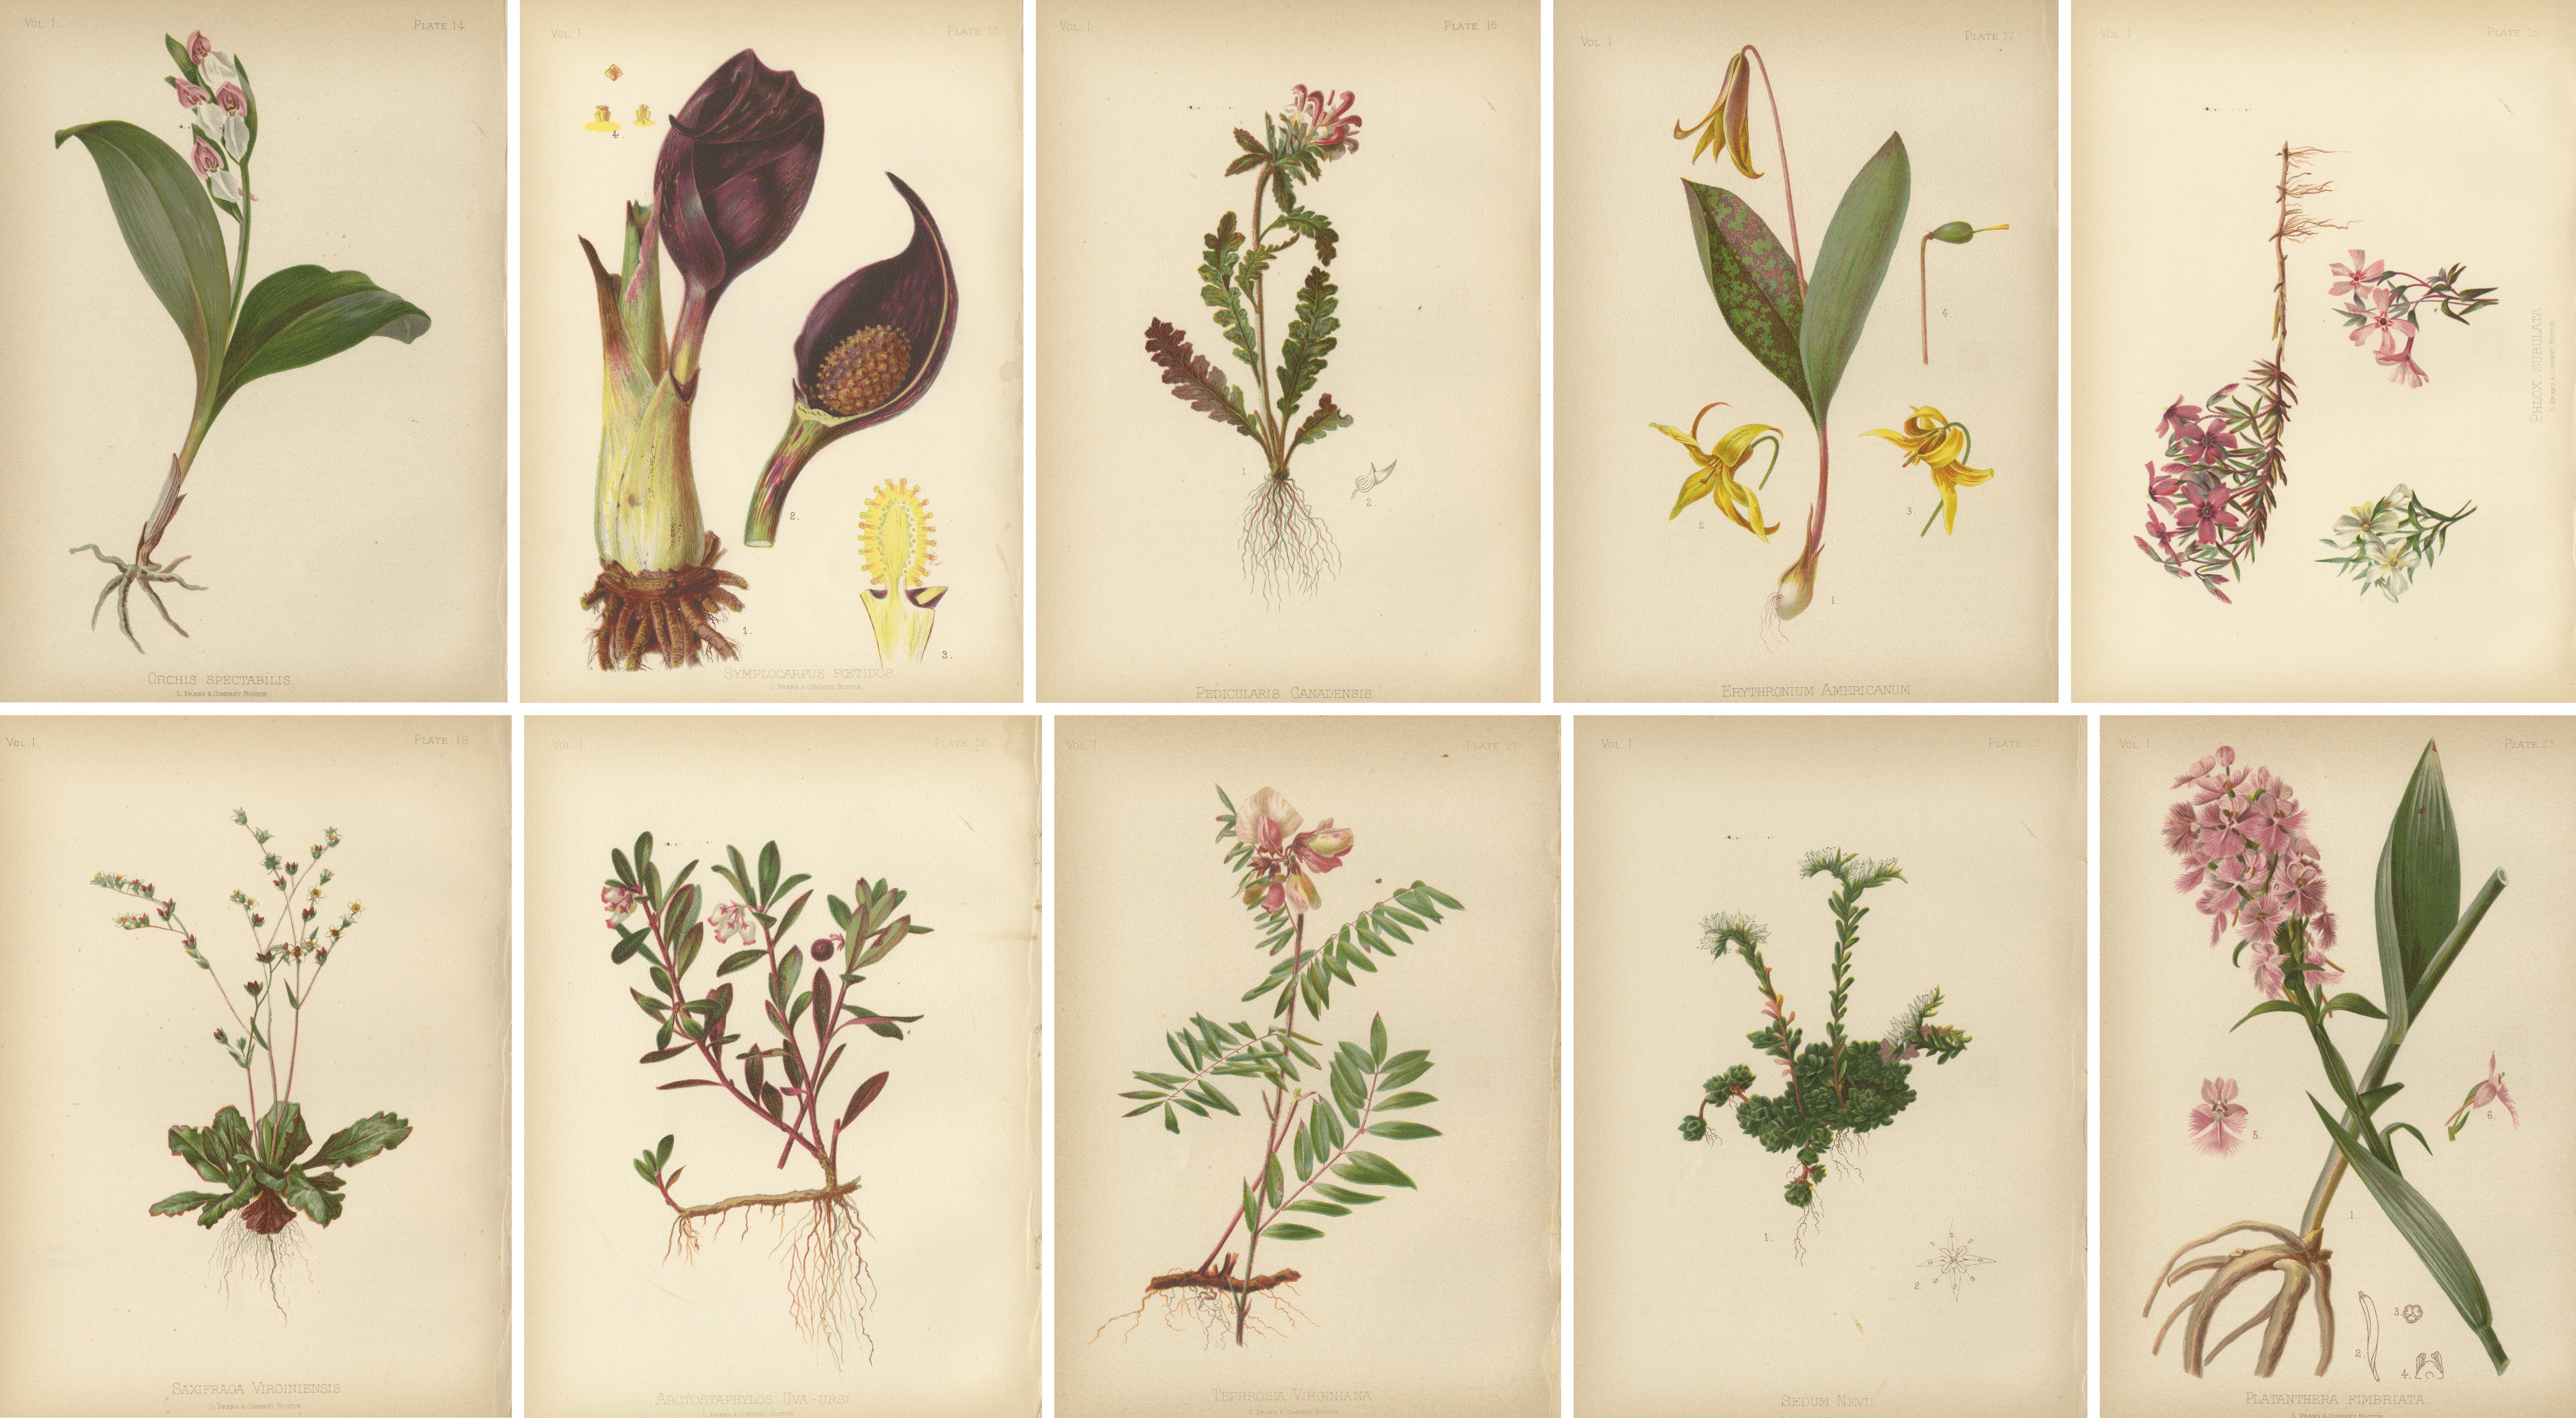 The image displays a collection of tten chromolithographs depicting various plant species. These illustrations are characterized by their botanical accuracy and aesthetic appeal, typical of late 19th-century natural history publications. 

Each